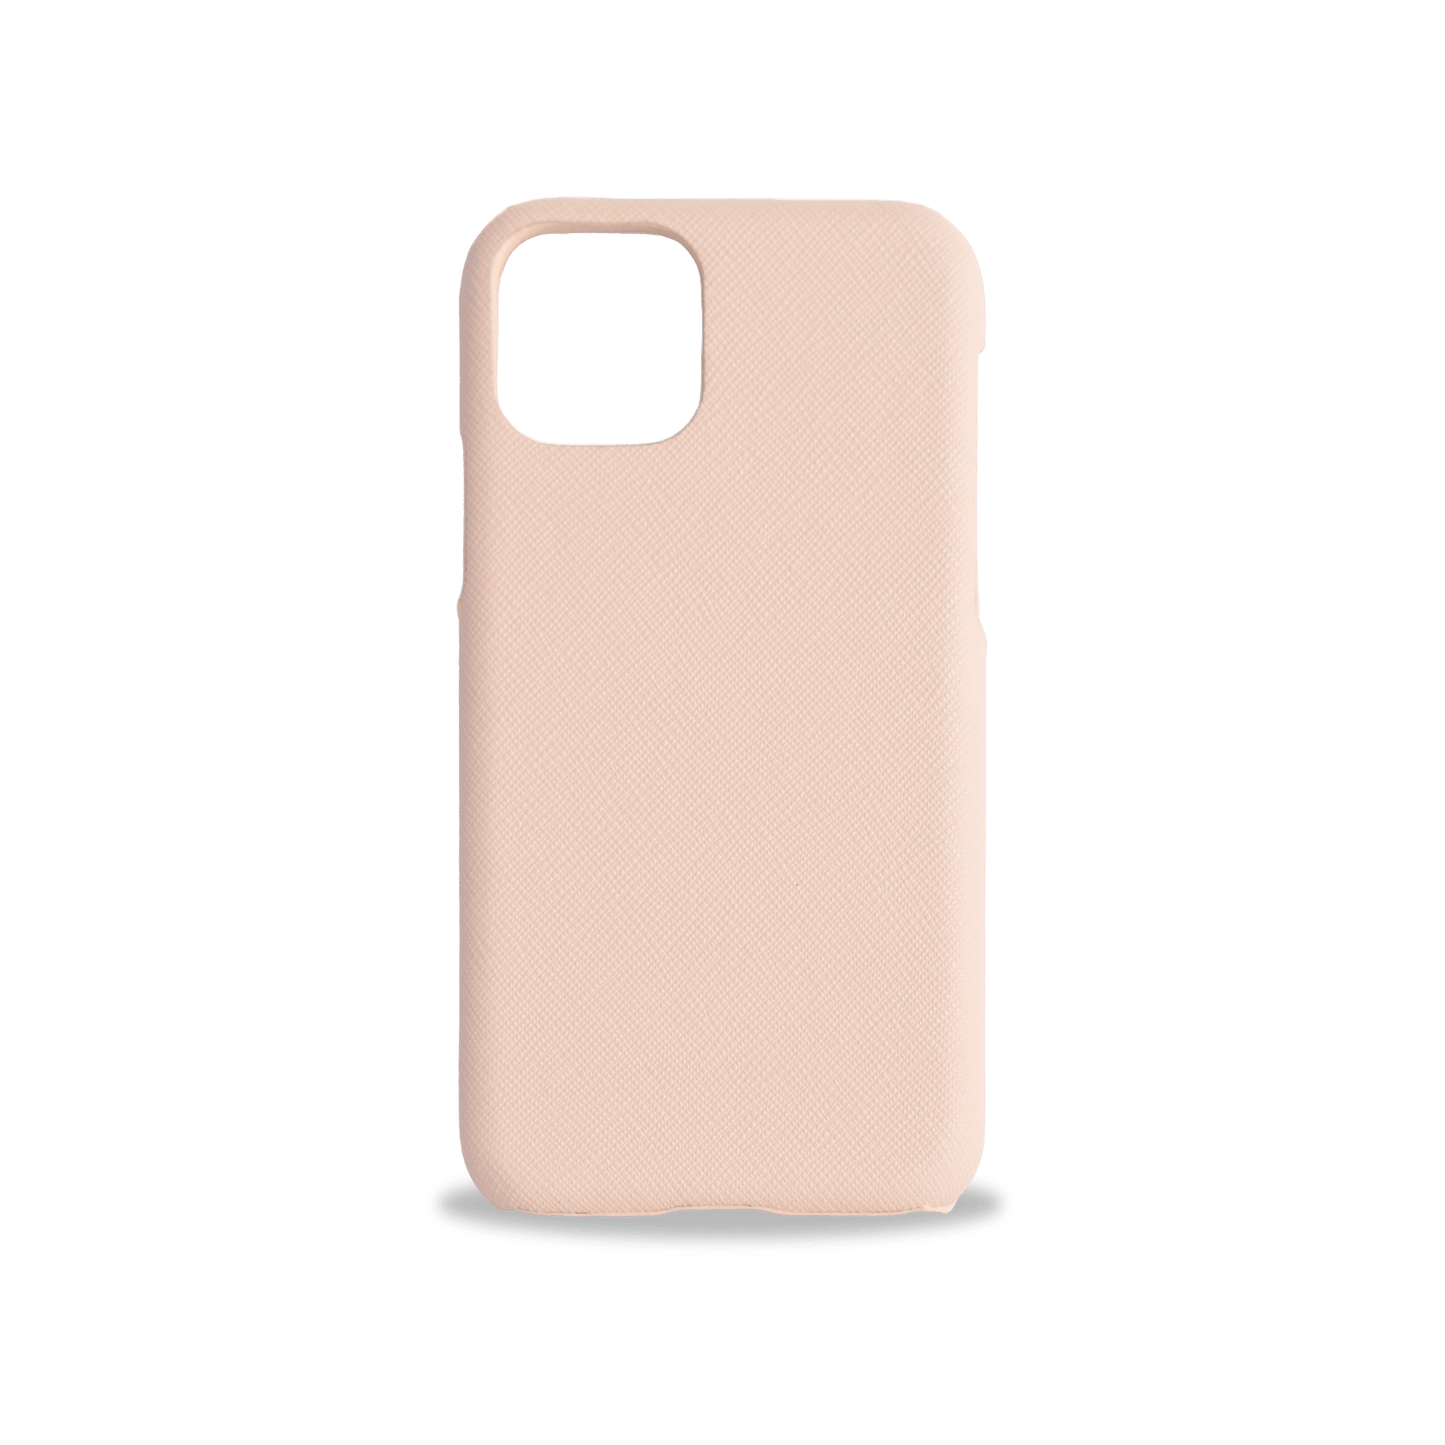 iPhone 11 case Pink - Personal Press